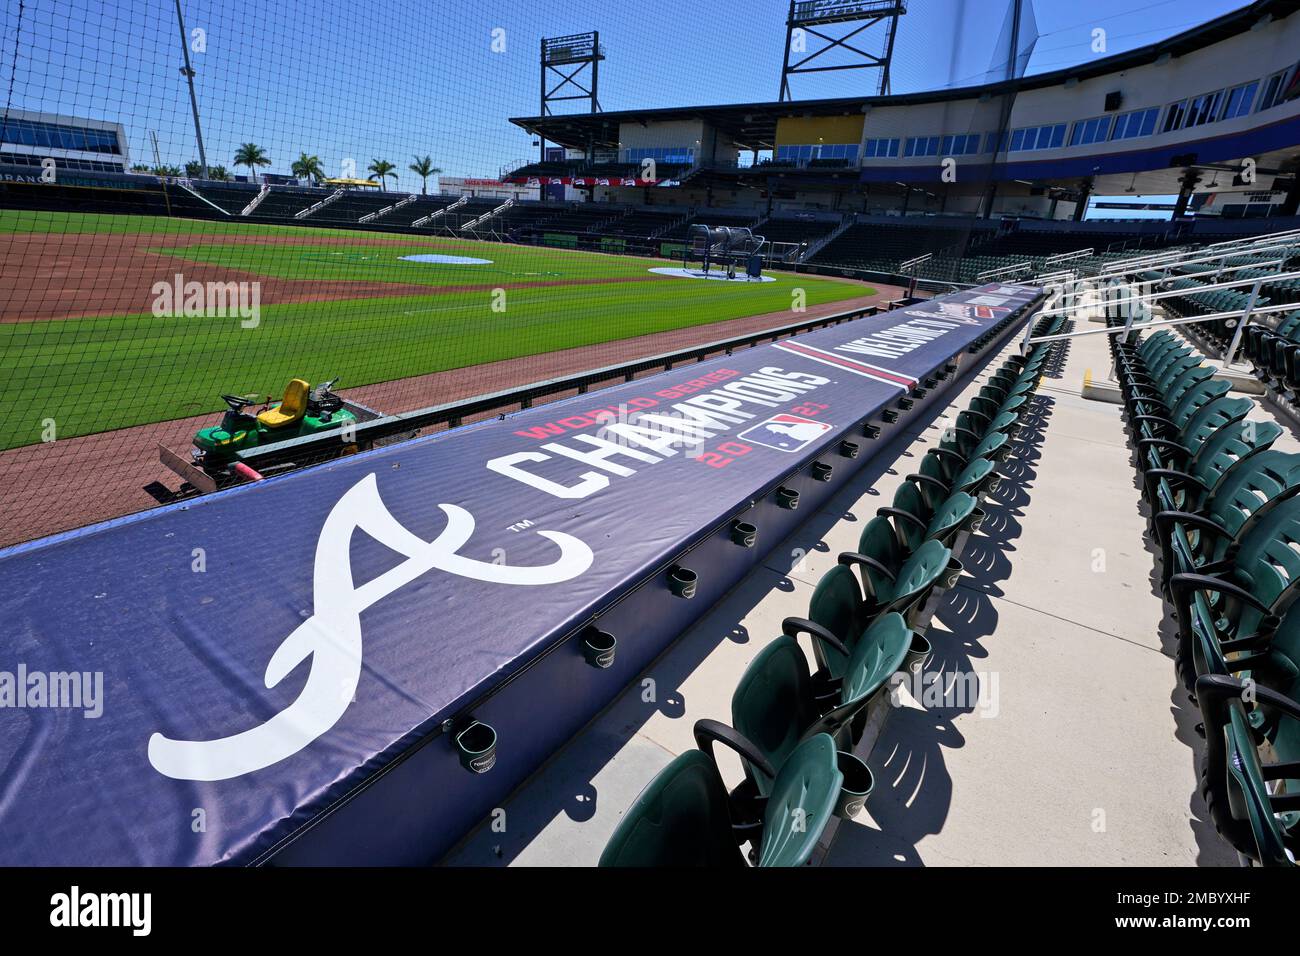 https://c8.alamy.com/comp/2MBYXHF/the-cooltoday-baseball-park-is-ready-for-the-atlanta-braves-for-the-start-of-major-league-baseball-spring-training-at-the-cooltoday-park-sunday-march-13-2022-in-north-port-fla-ap-photosteve-helber-2MBYXHF.jpg